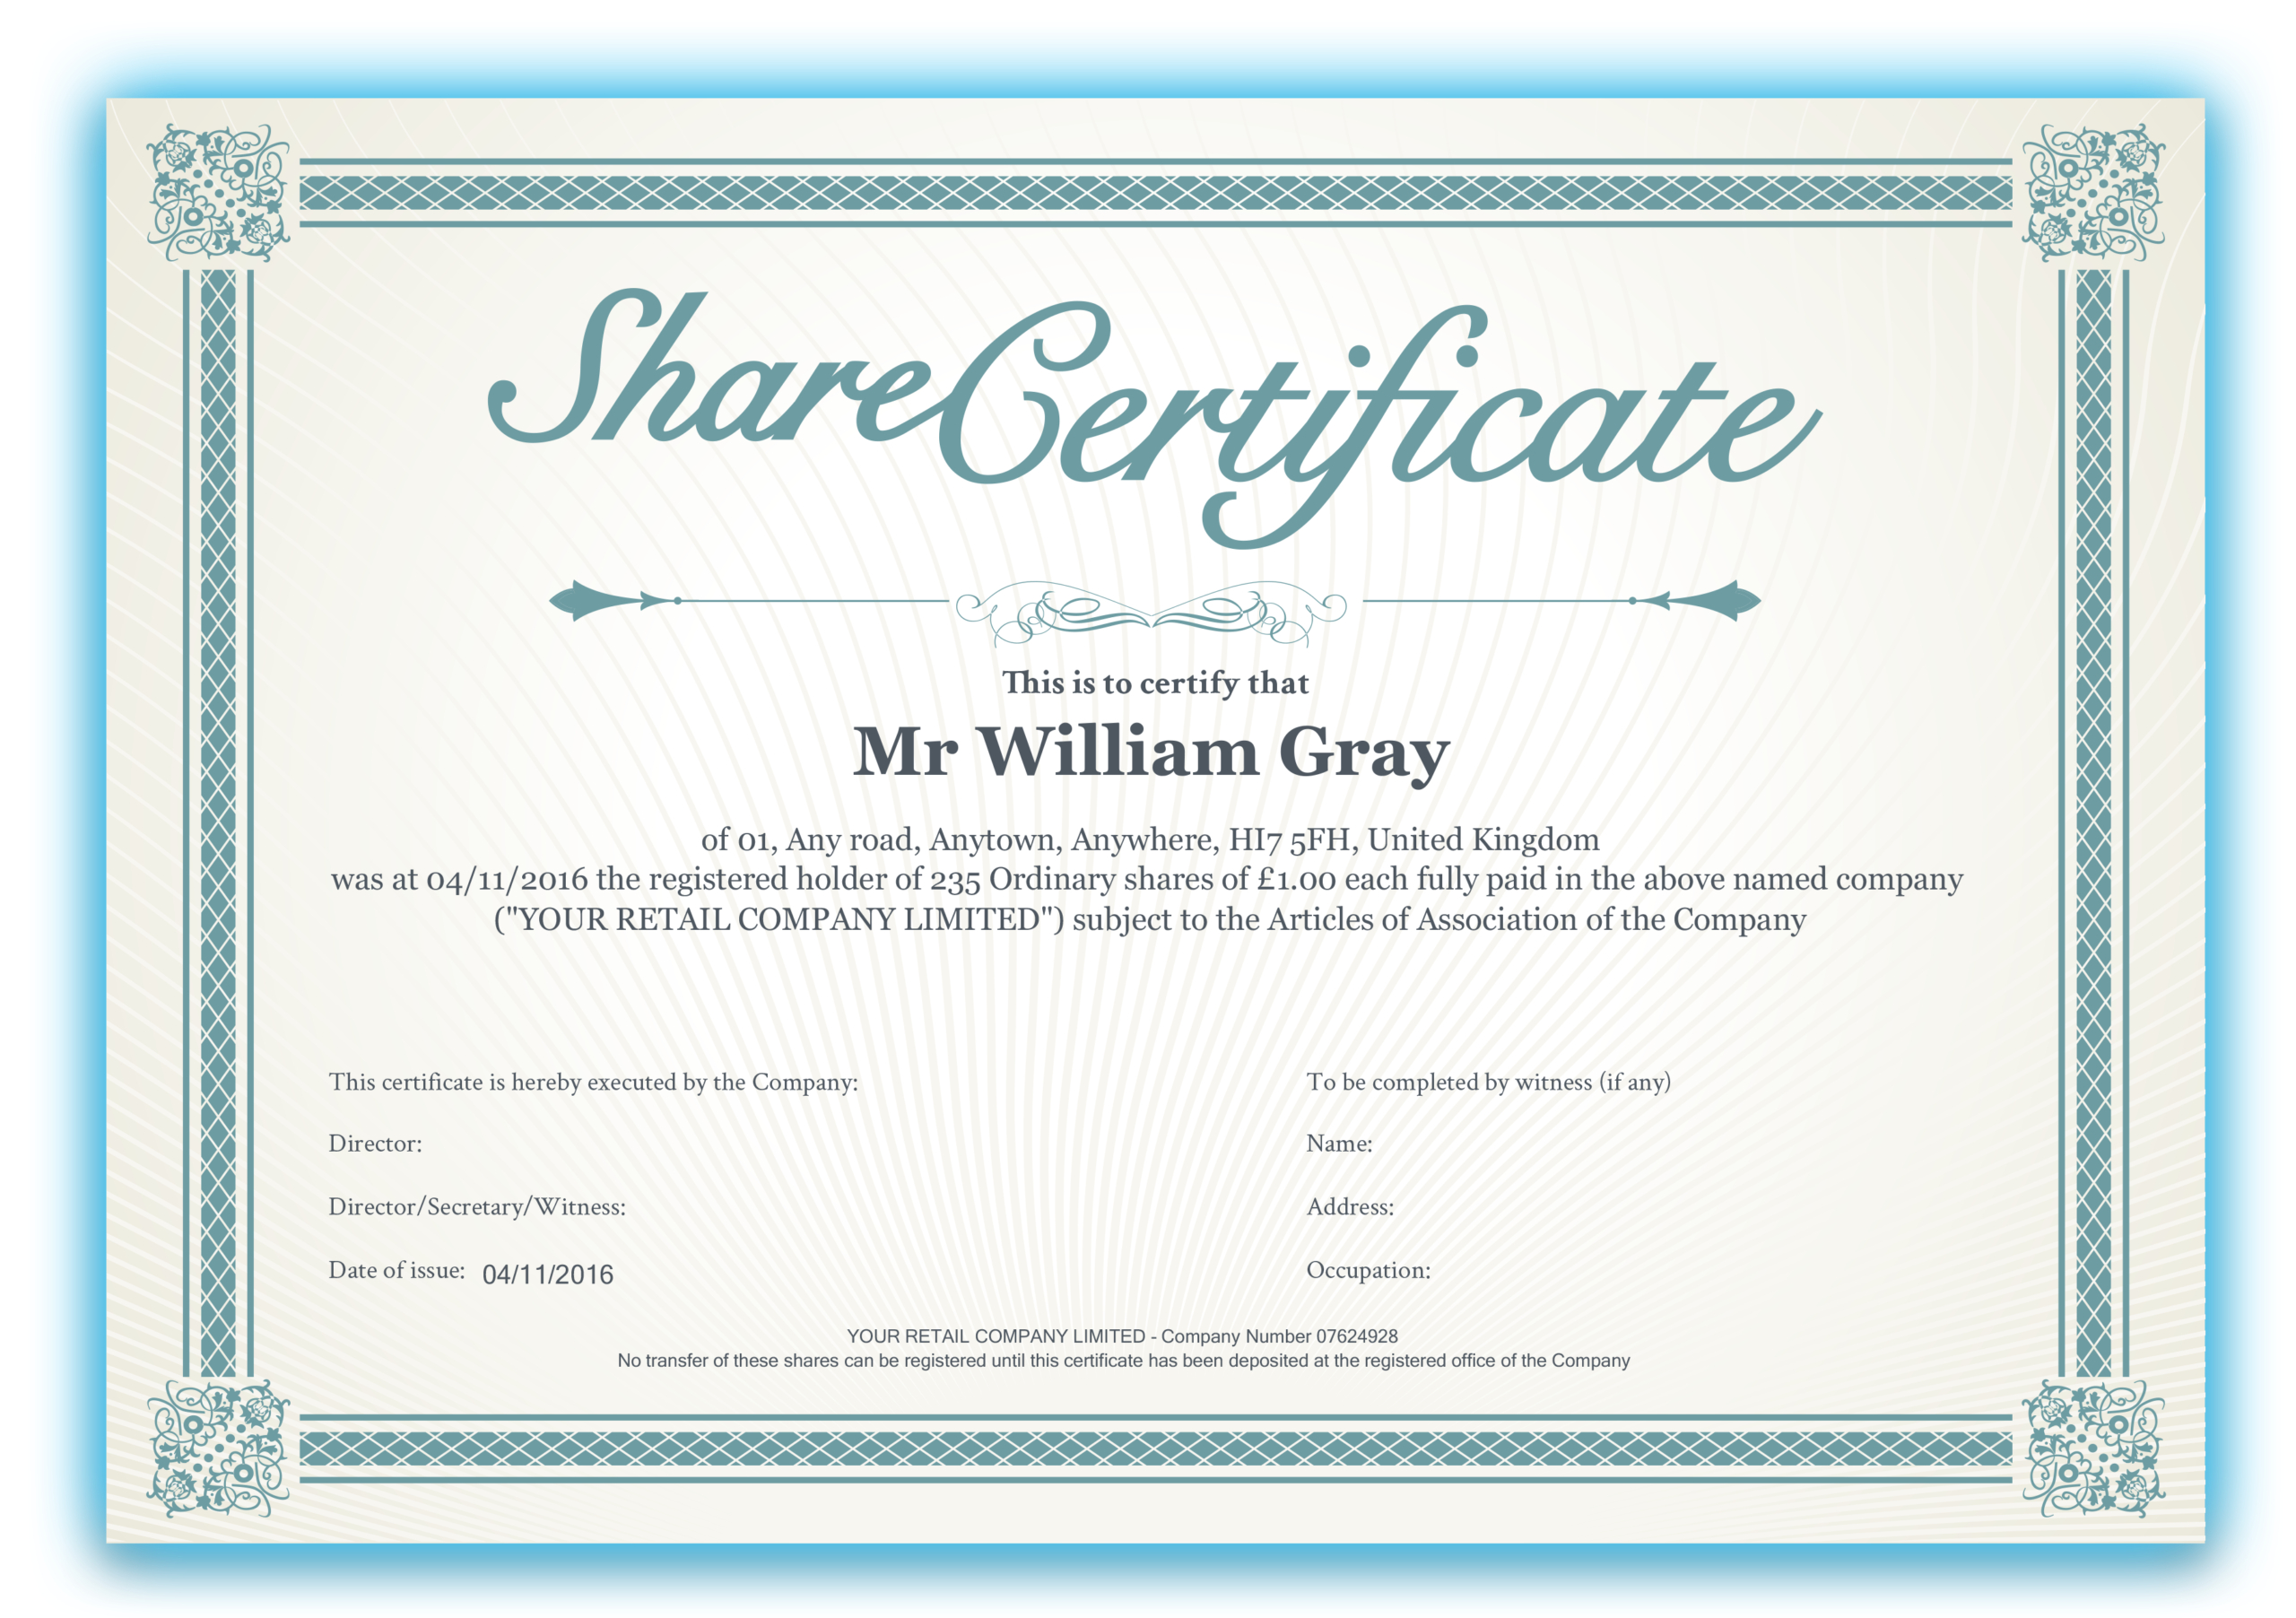 Shares Certificate Dalepmidnightpigco Within Corporate Pertaining To Printable Corporate Share Certificate Template